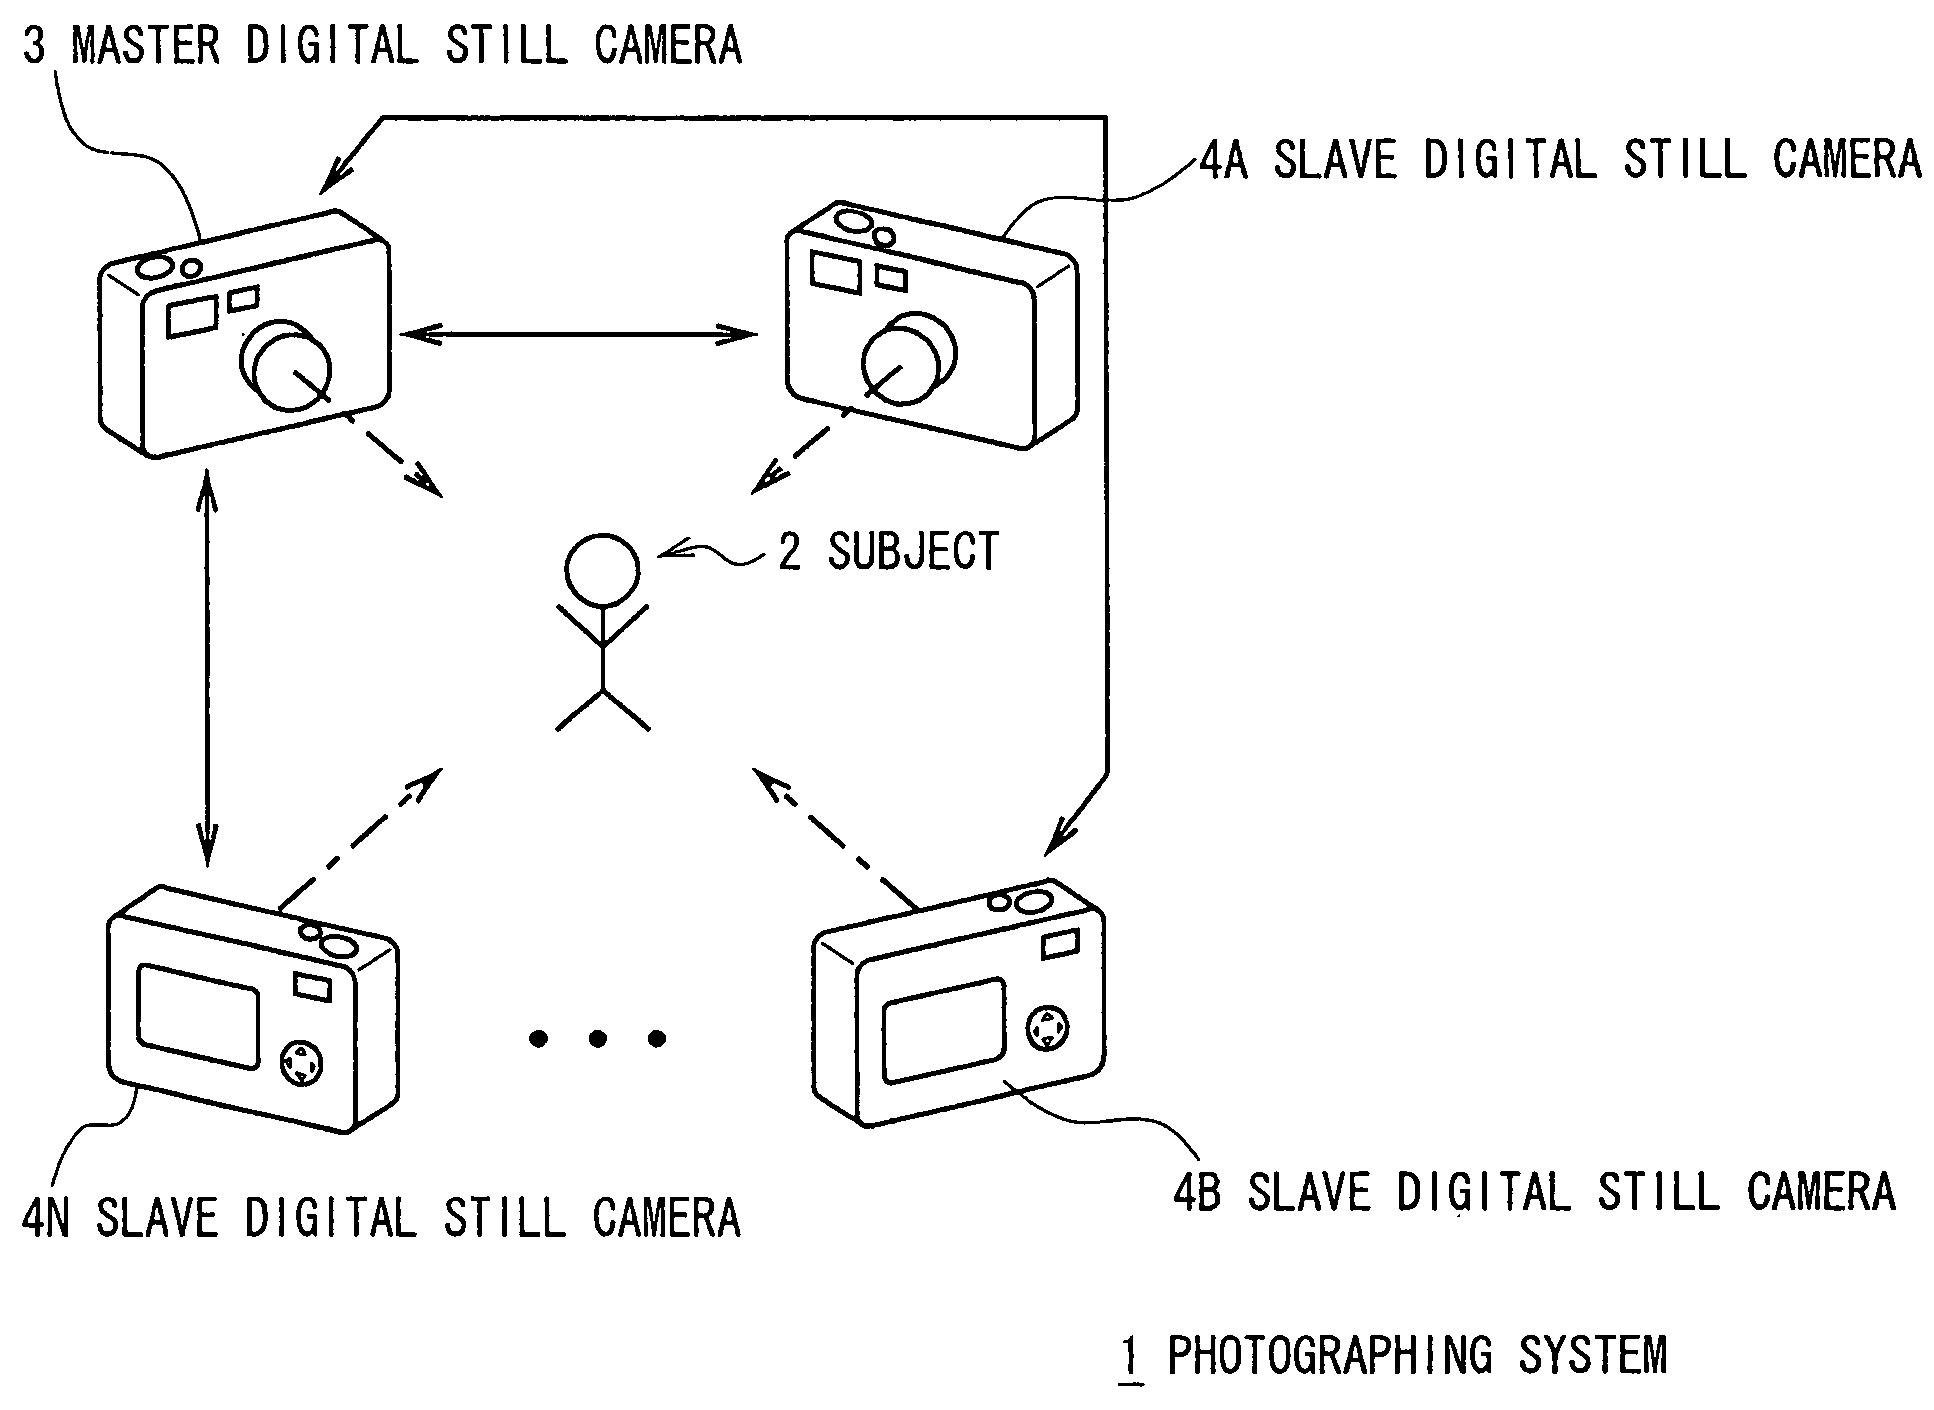 Photographing system